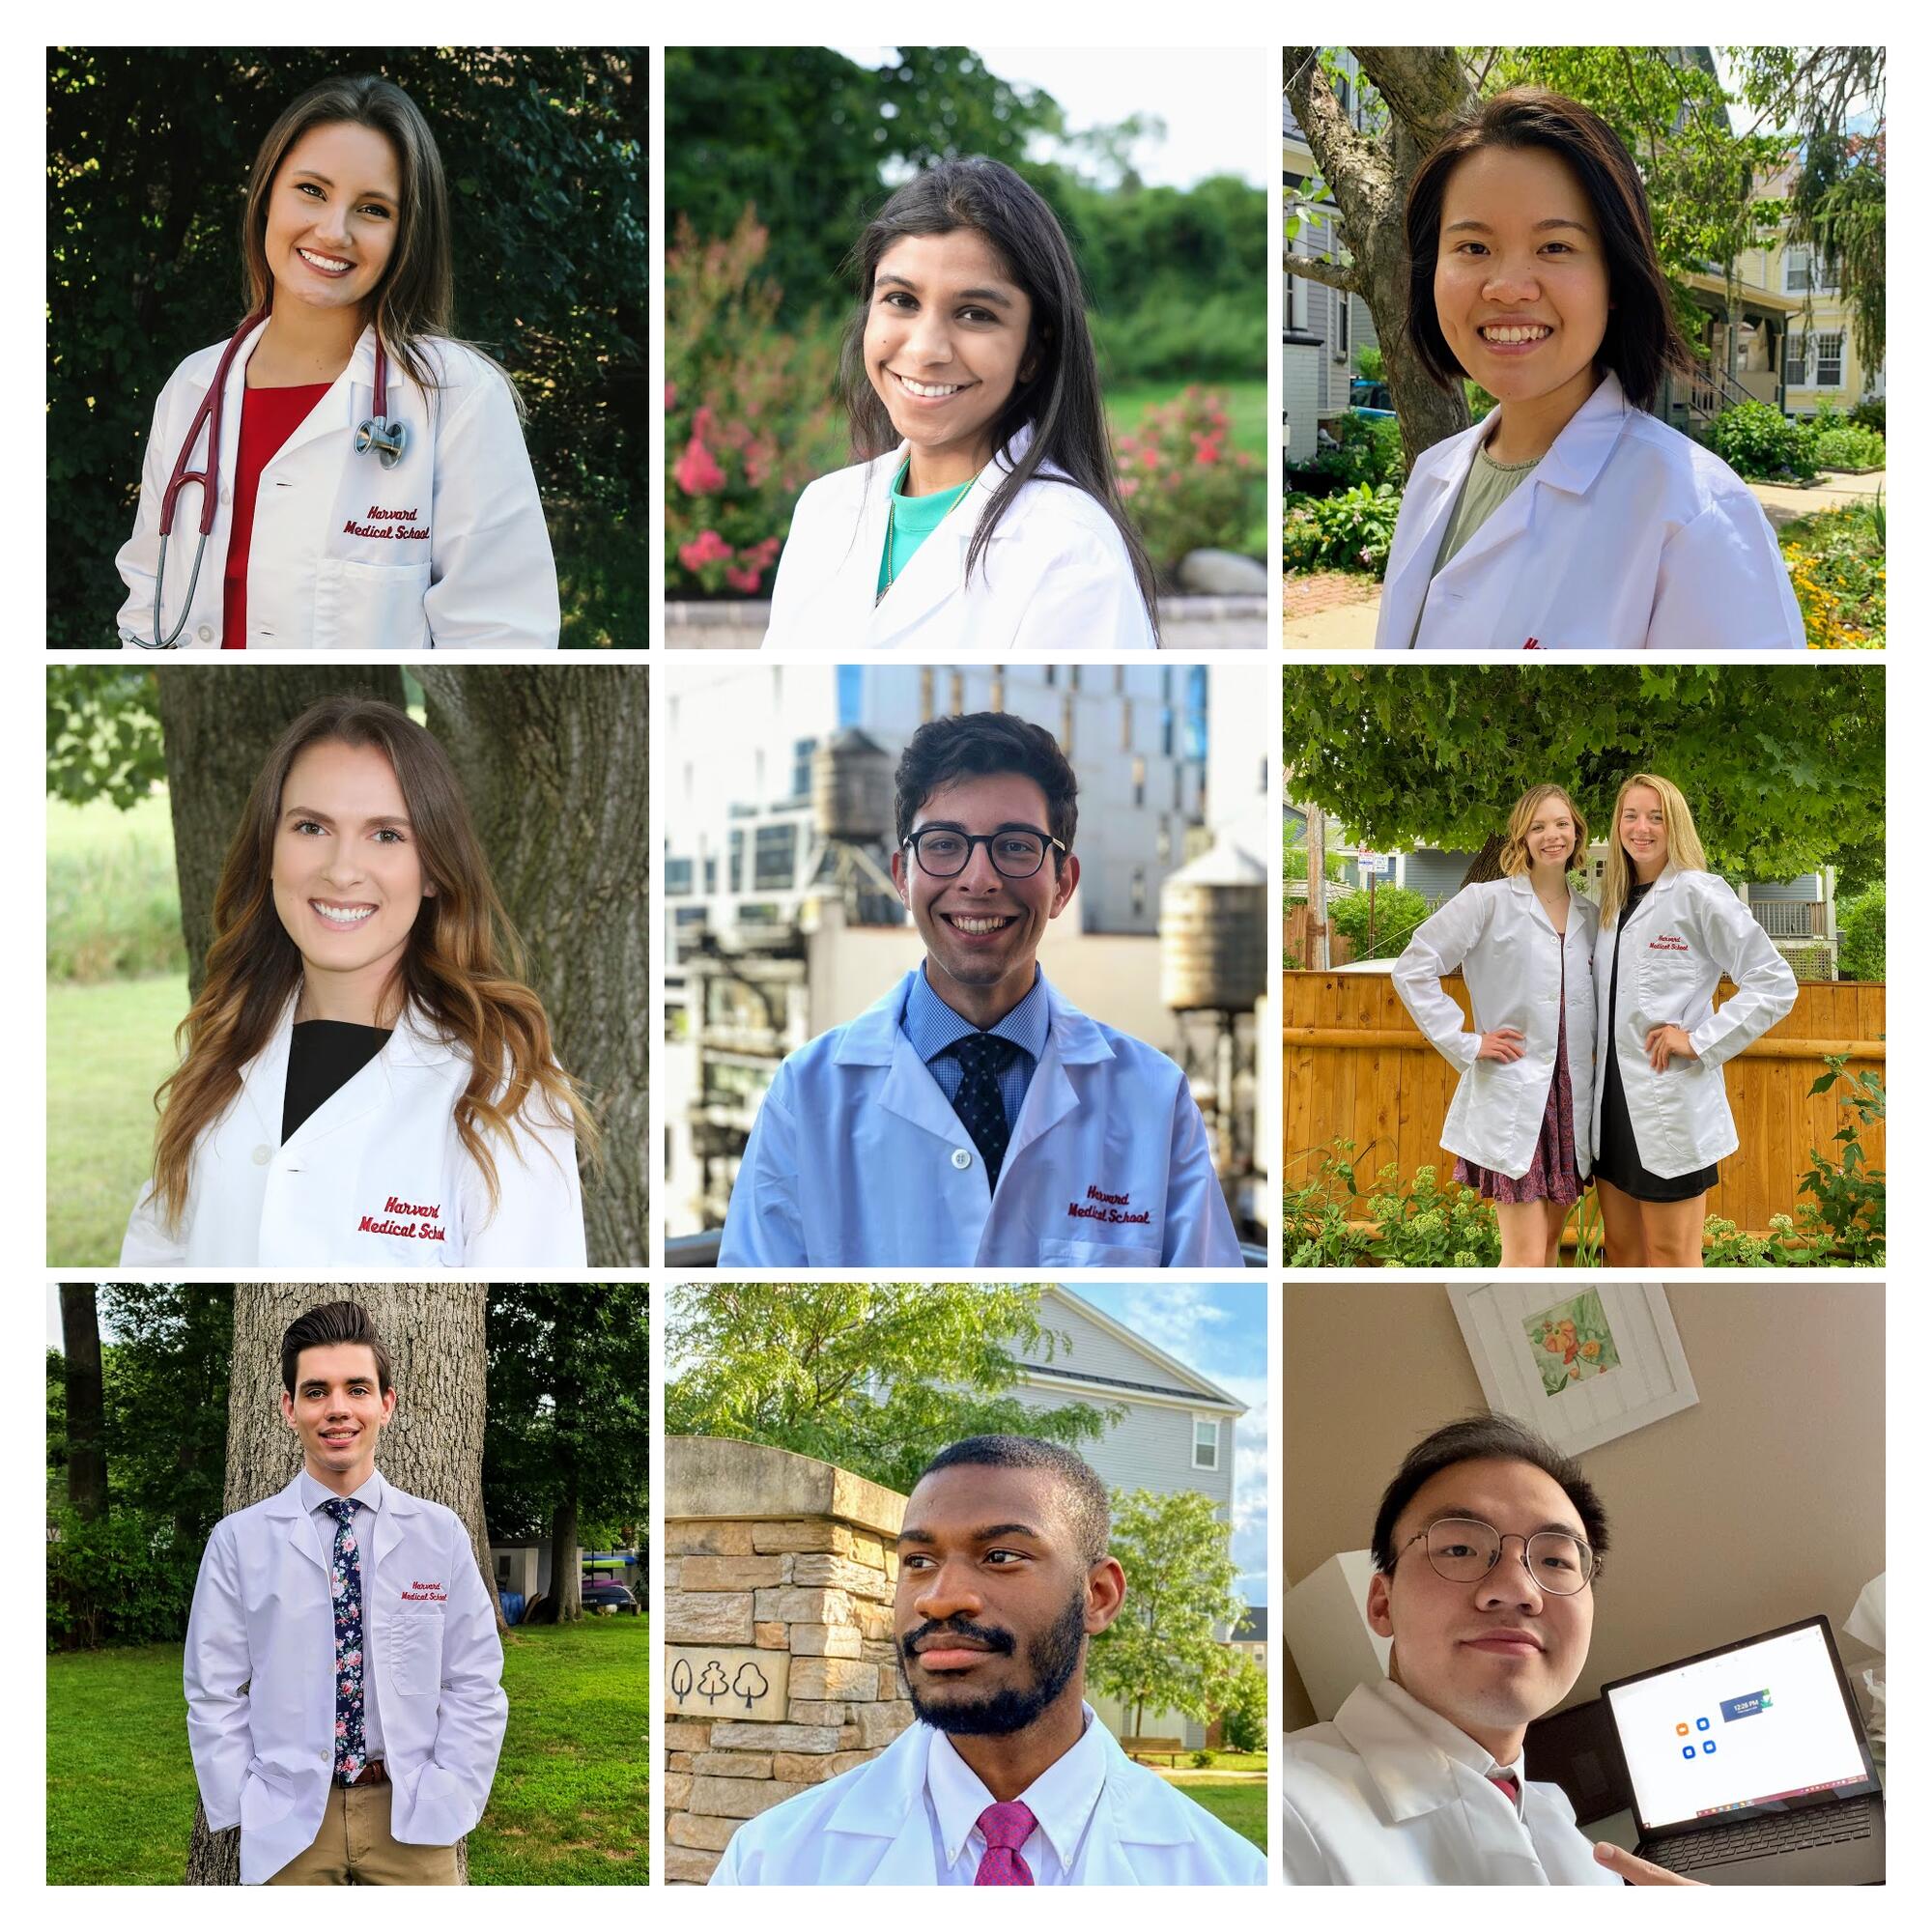 collage of students in white medical coats